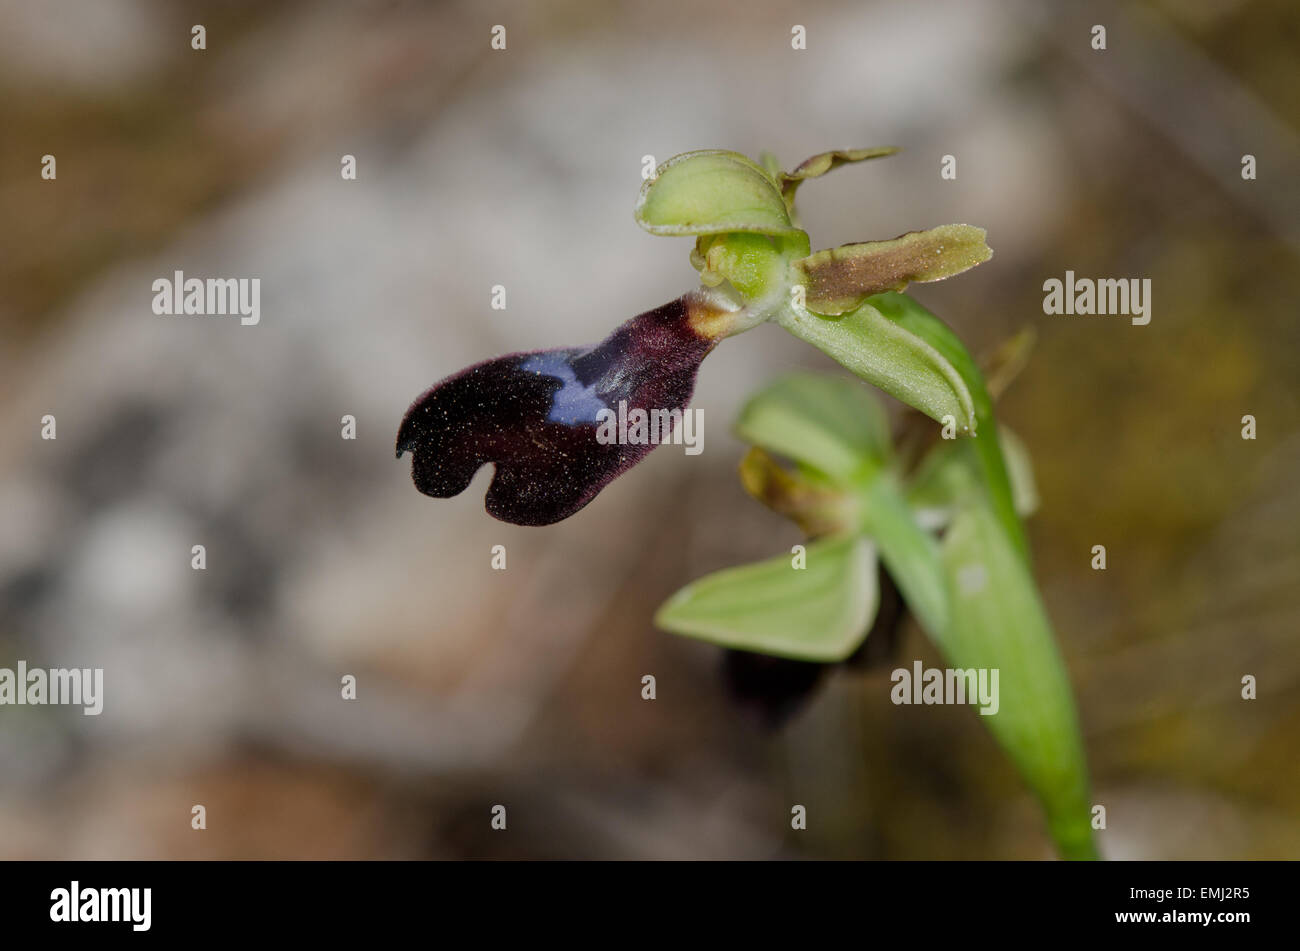 Wild Orchid, Ophrys atlantica, Atlas Orchid, Andalusia, Spagna meridionale. Foto Stock